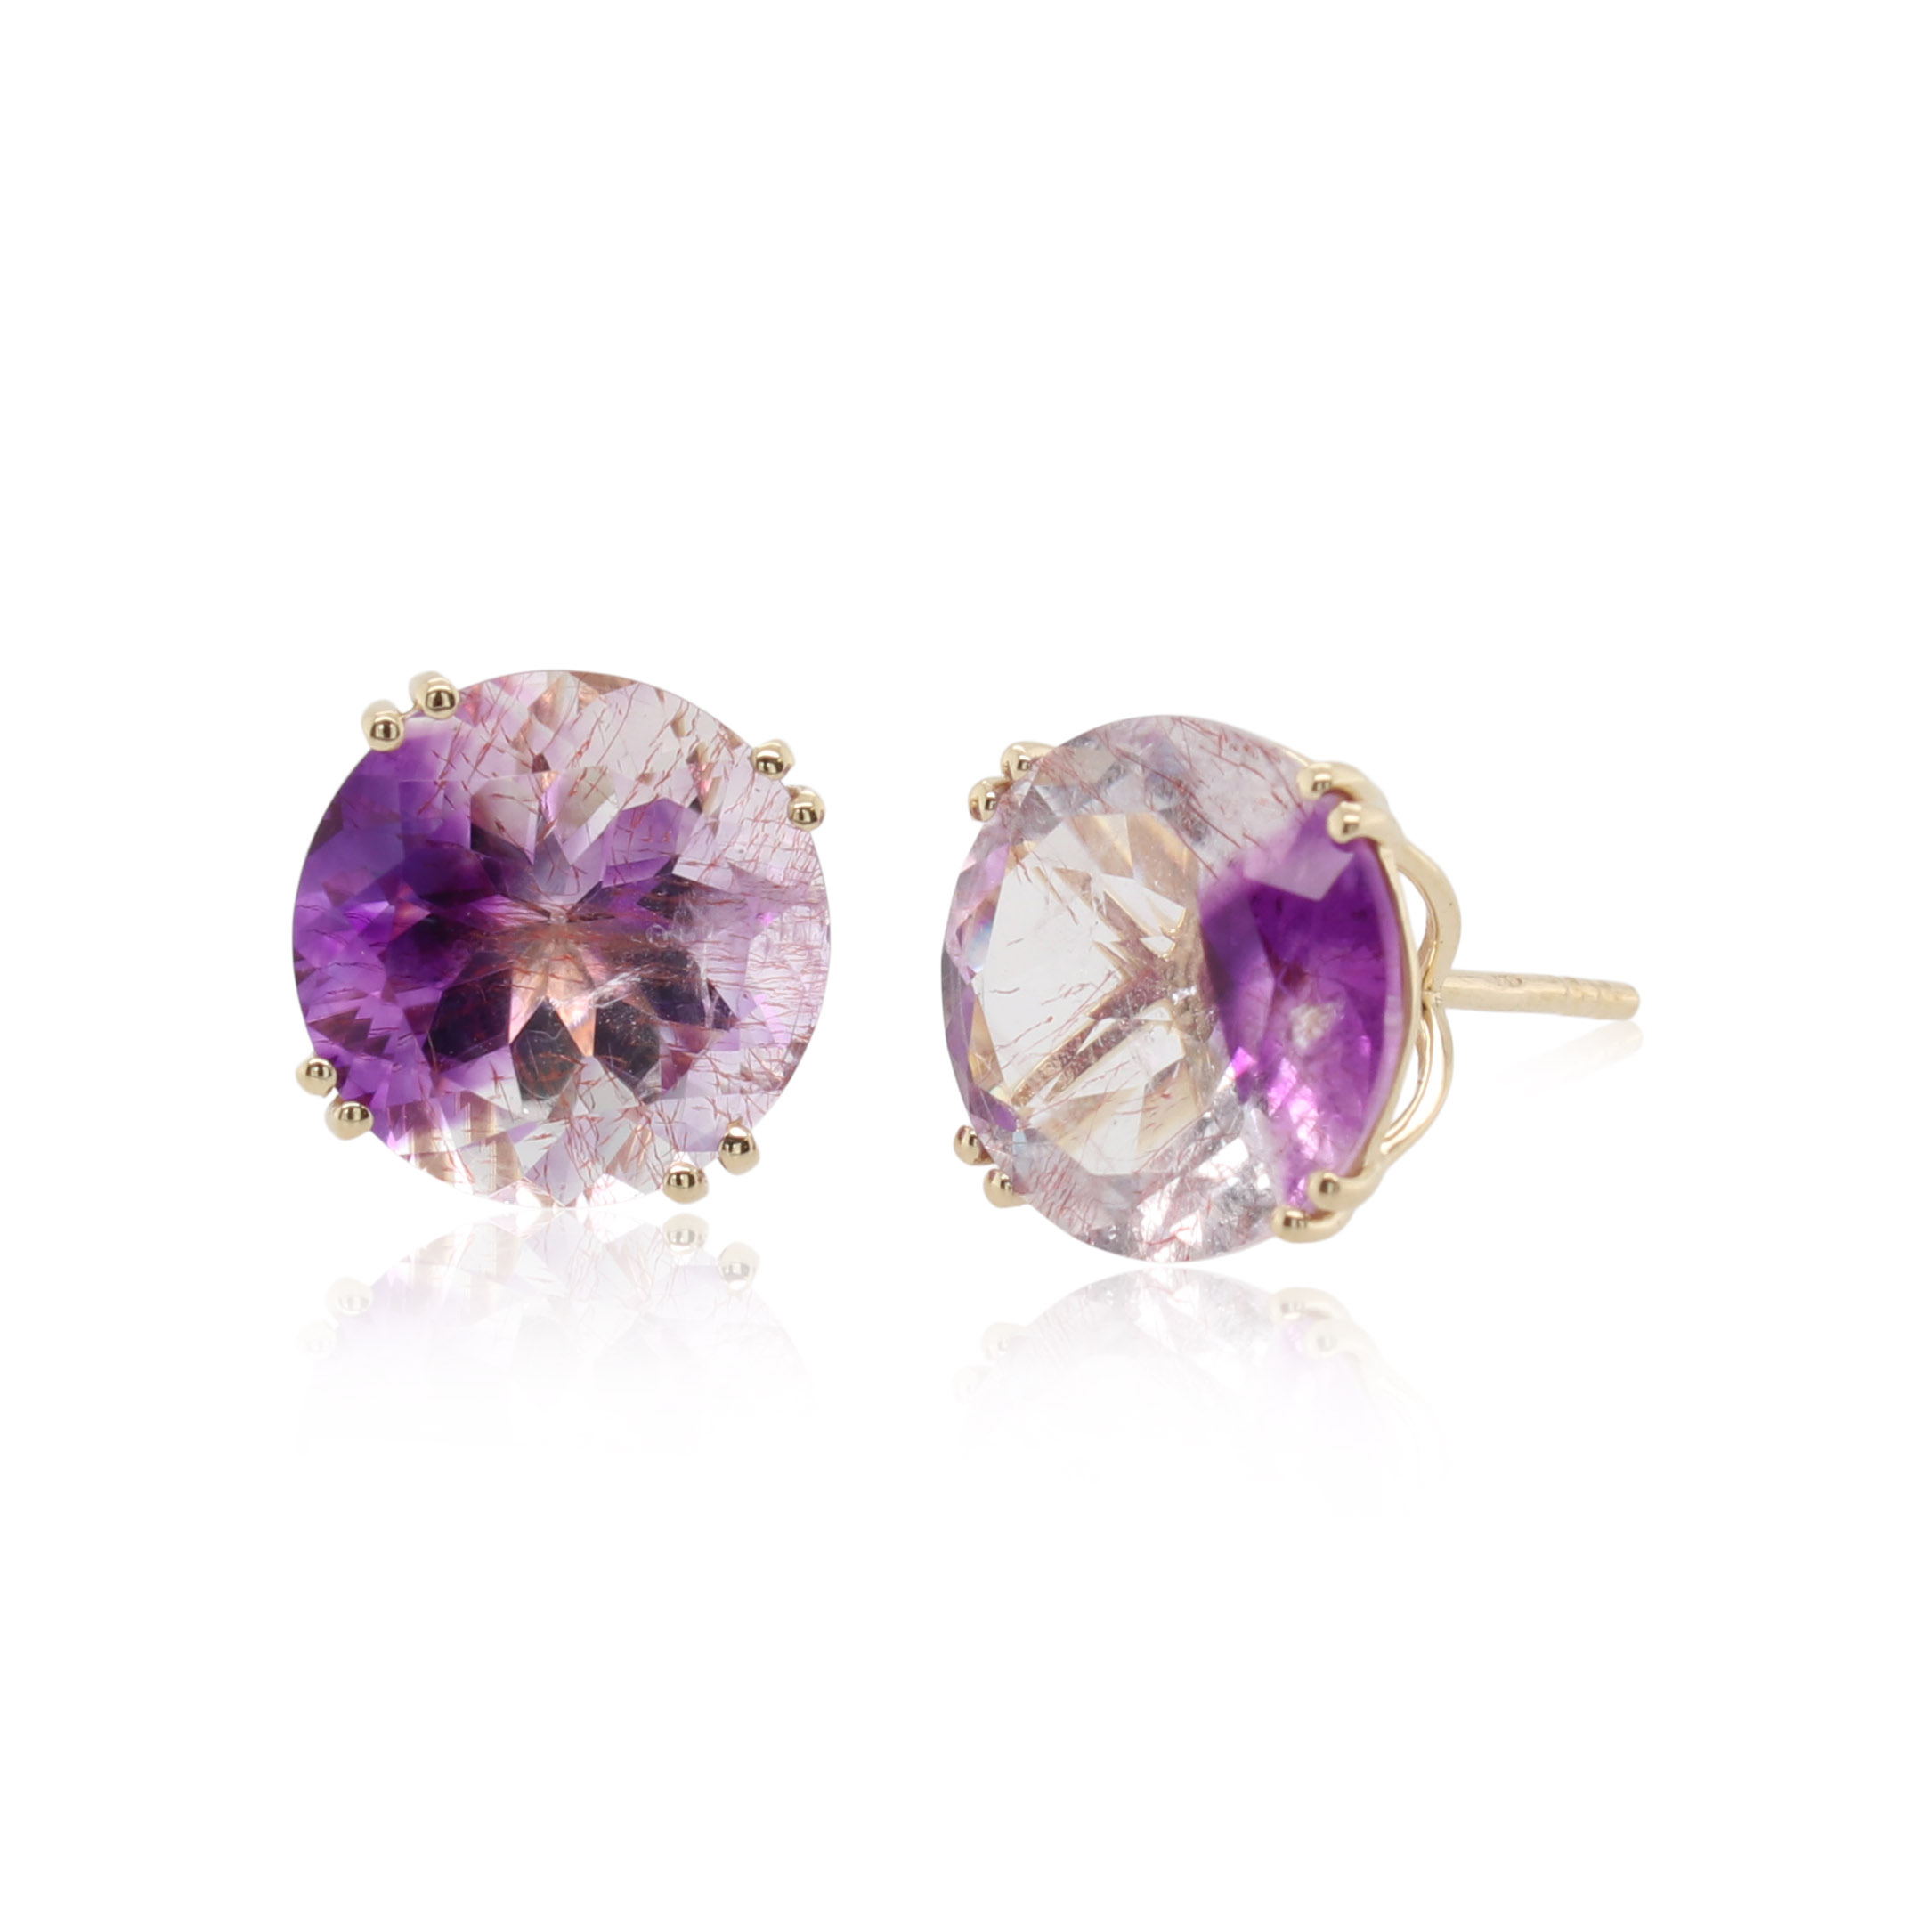 This pair of earrings is crafted from 10k yellow gold and features round rutilated amethyst and quartz gemstones.